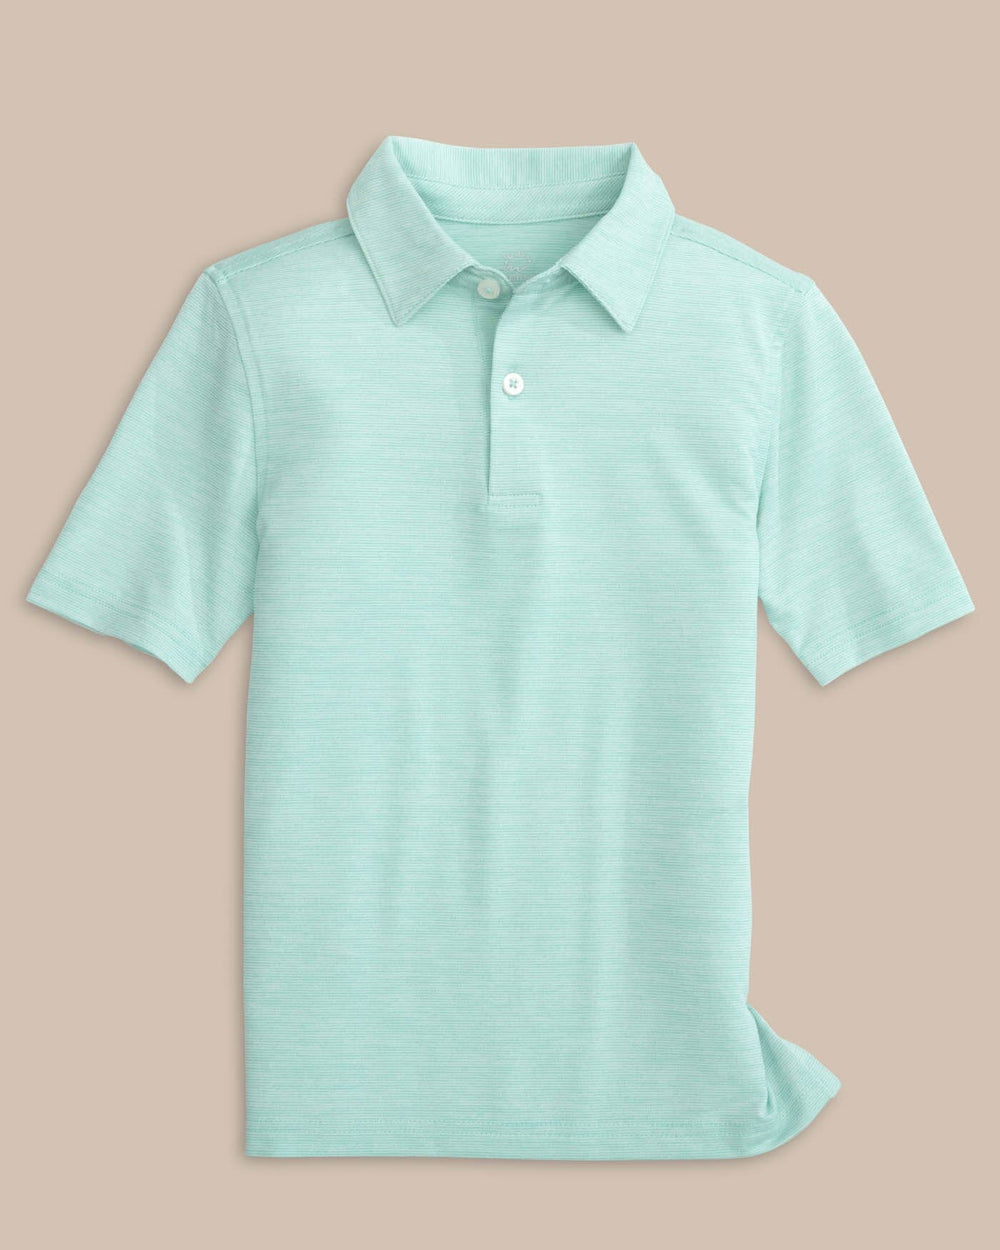 The front view of the Southern Tide Team Colors Boy's Driver Spacedye Polo Shirt by Southern Tide - Marine Blue